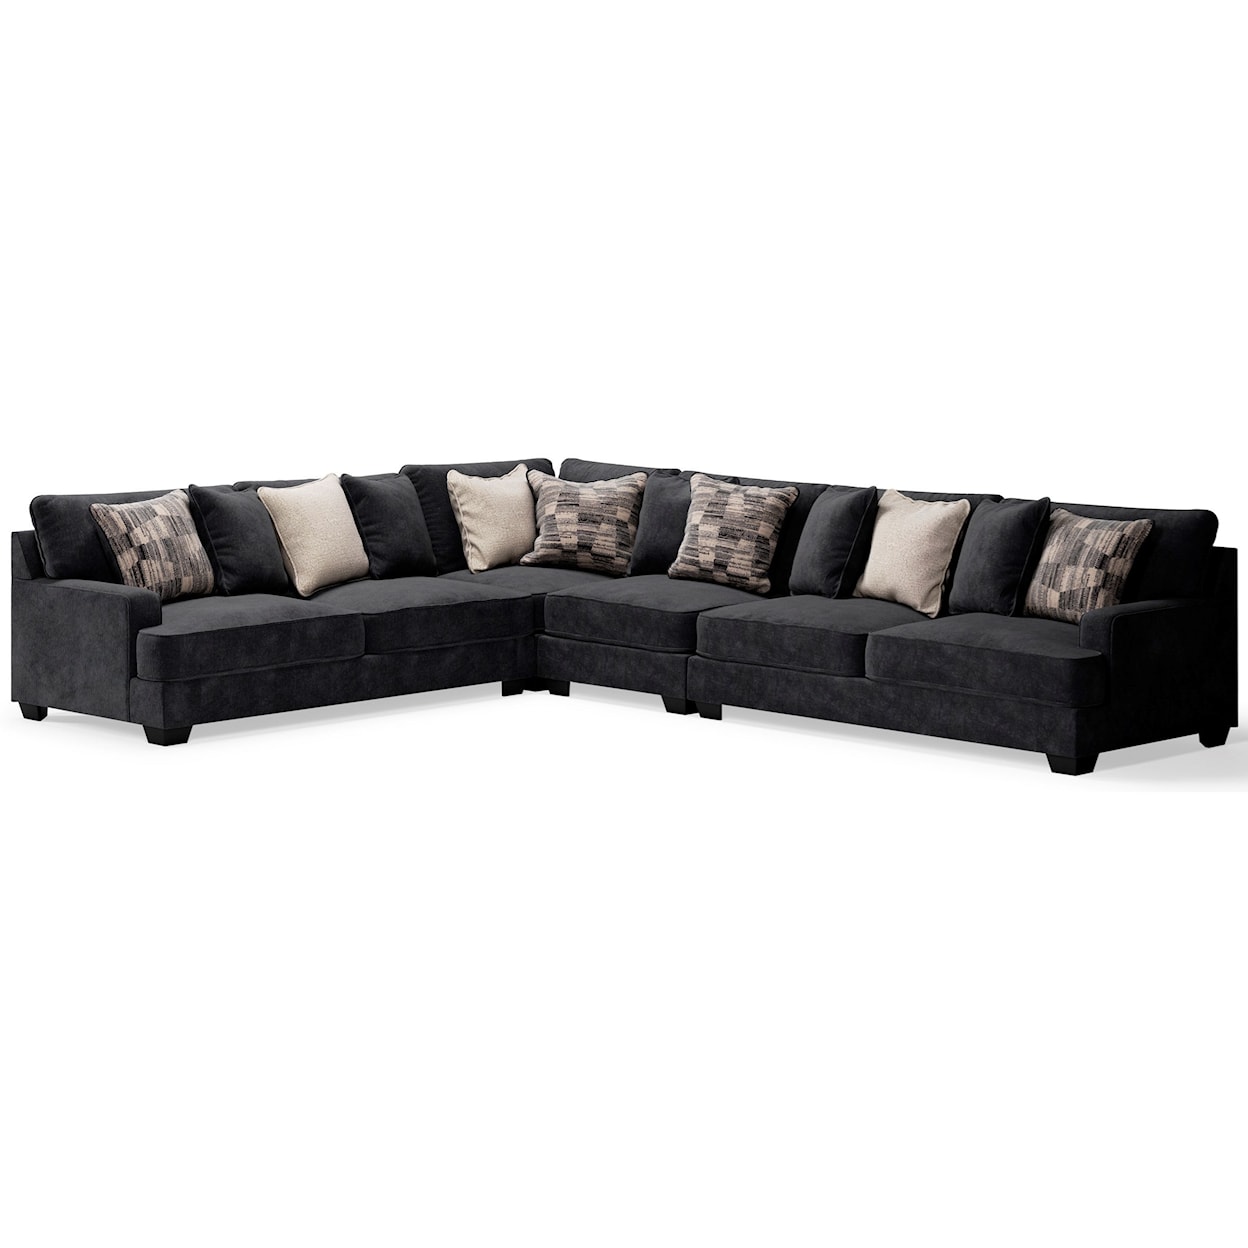 Signature Design by Ashley Lavernett 4-Piece Sectional